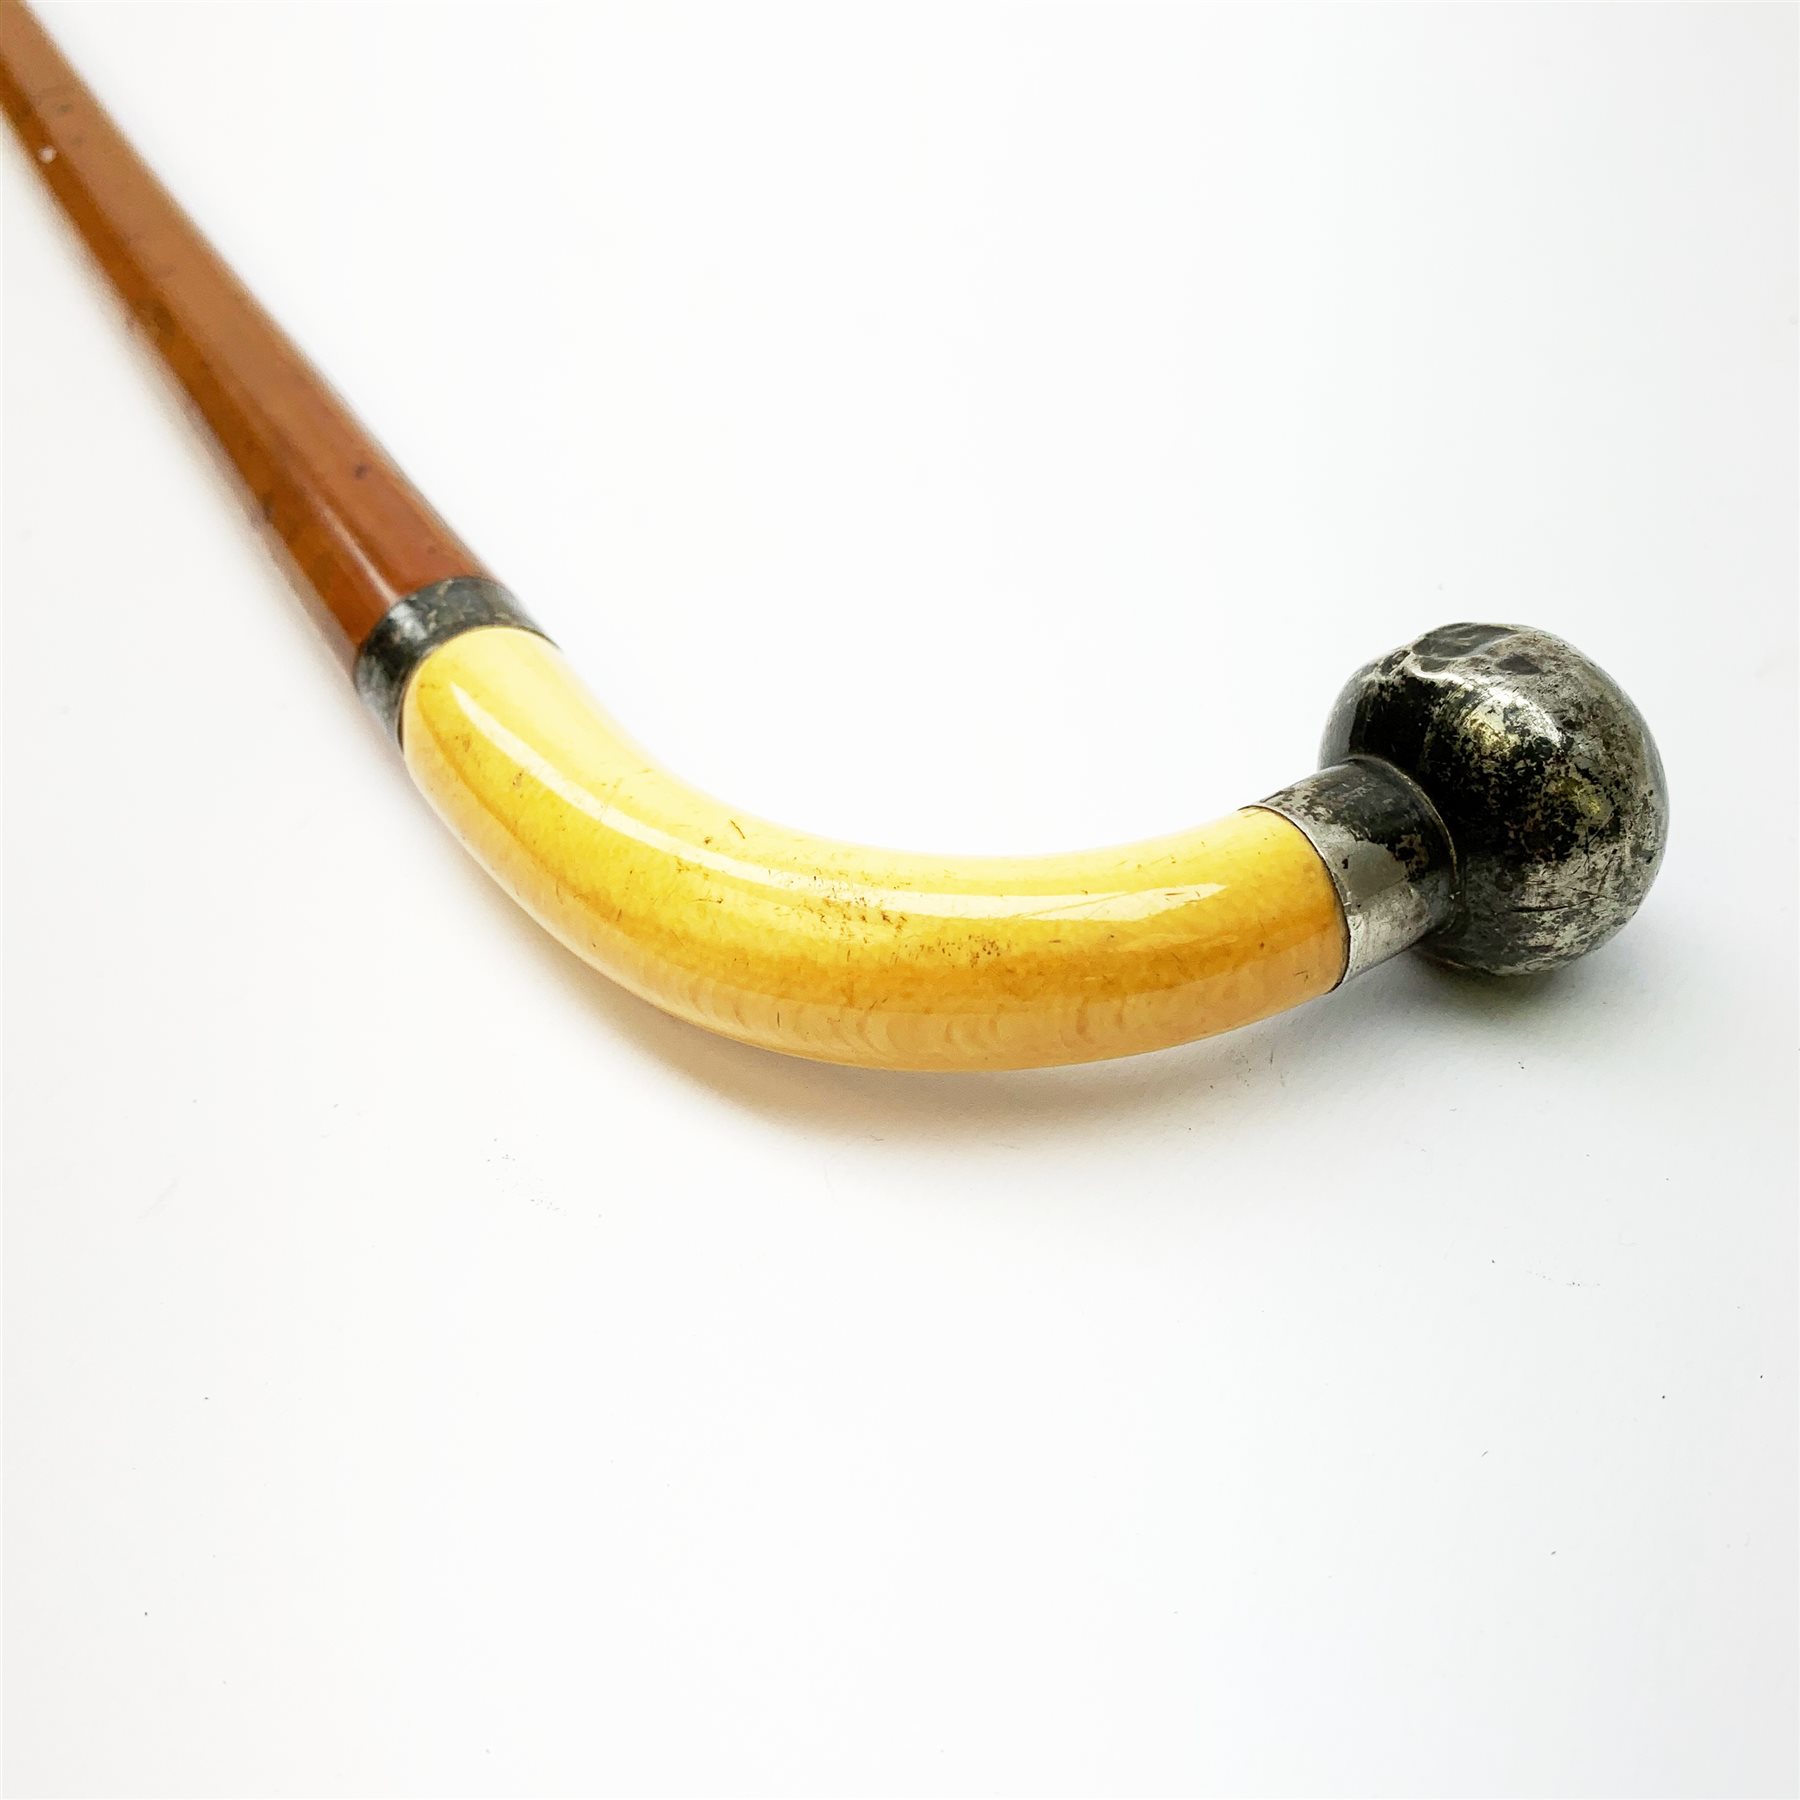 19th century malacca sword-stick with ivory handle and engraved white metal mounts, slim 74cm engrav - Image 8 of 10